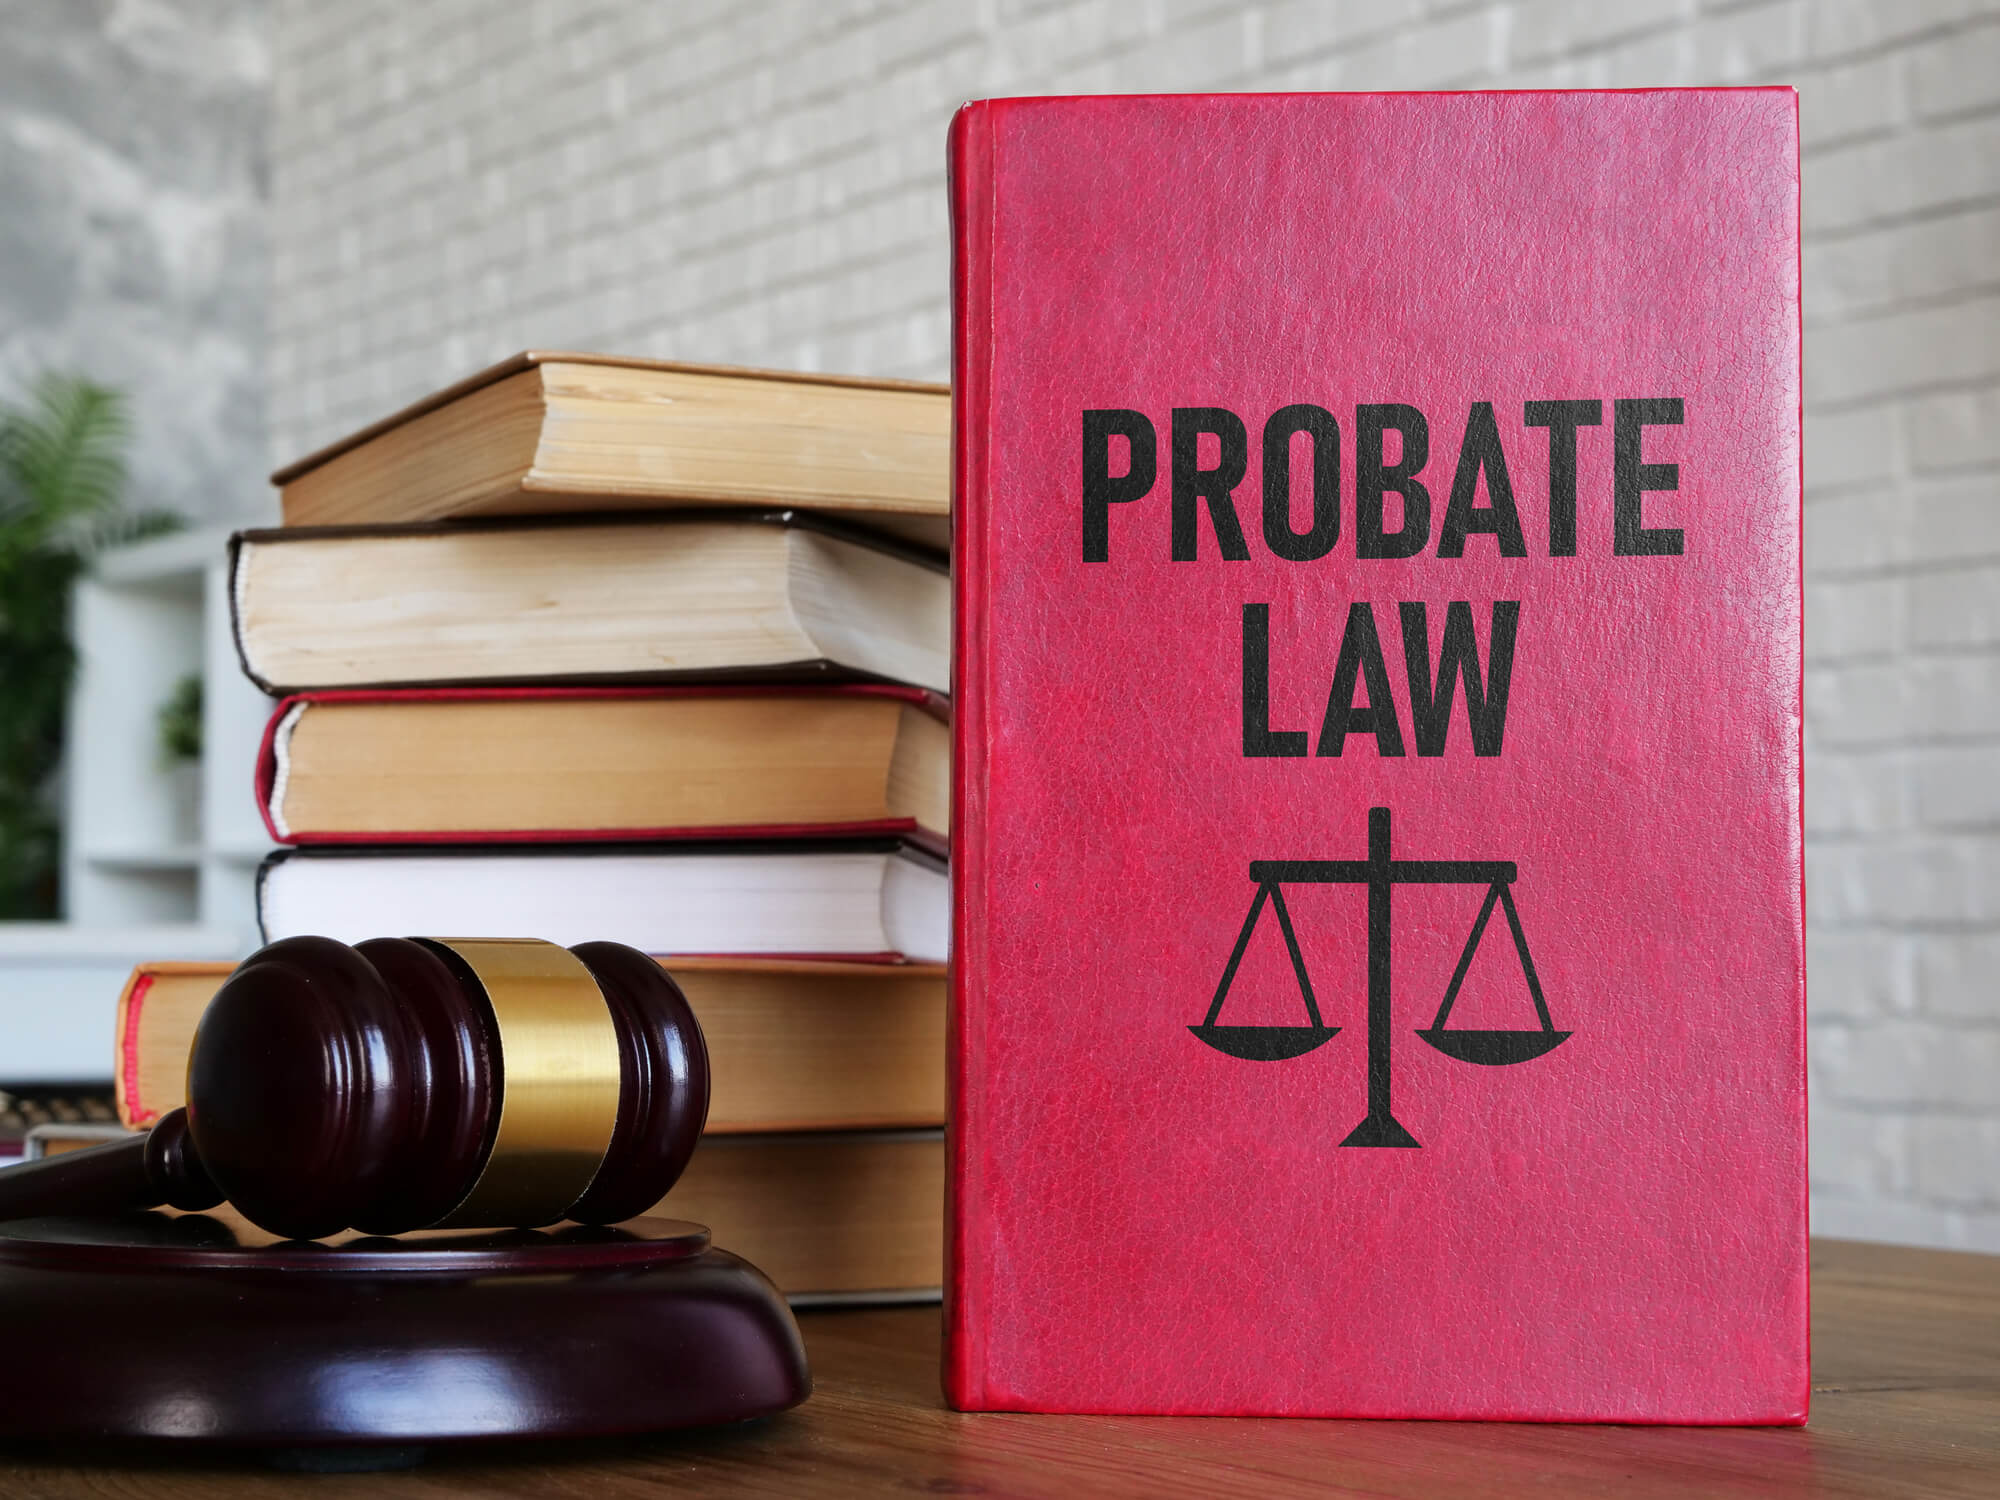 Gavel next to a stack of probate law books